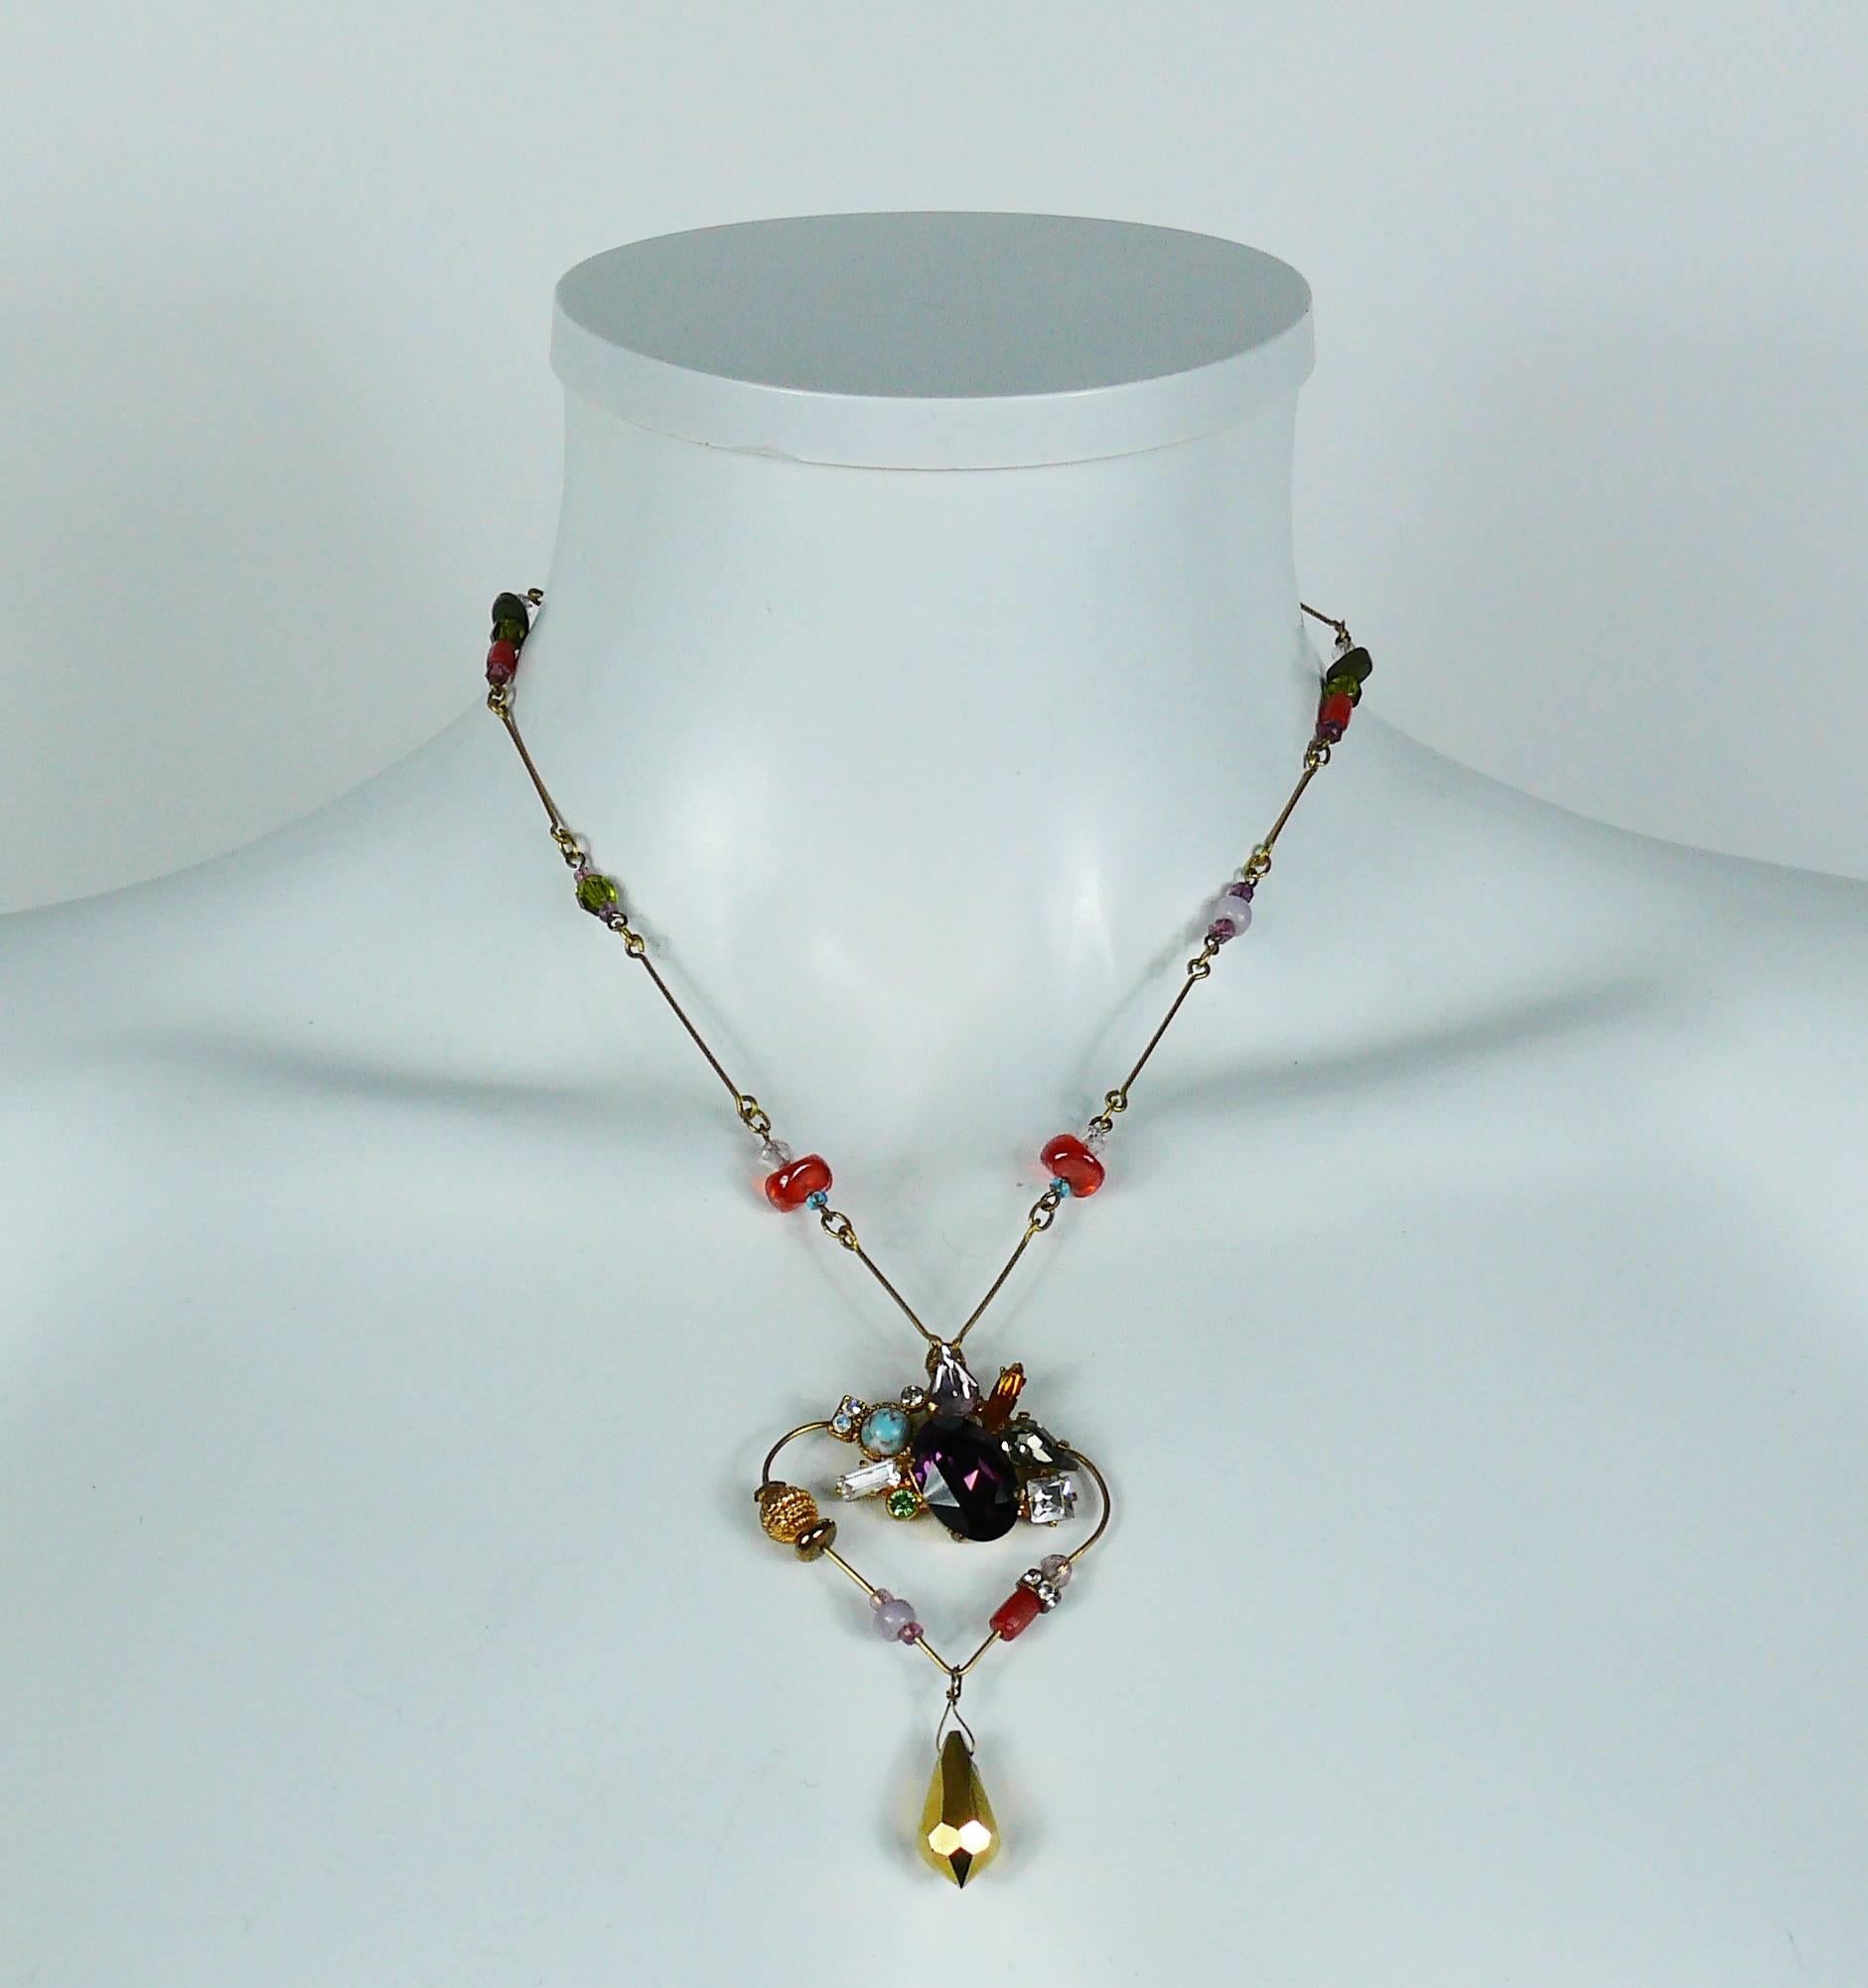 CHRISTIAN LACROIX vintage heart pendant necklace embellished with faux turquoise, glass pearls, multicolored crystals and gold tone faceted glass drop.

Marked CHRISTIAN LACROIX CL Made in France.

Indicative measurements : adjustable length from